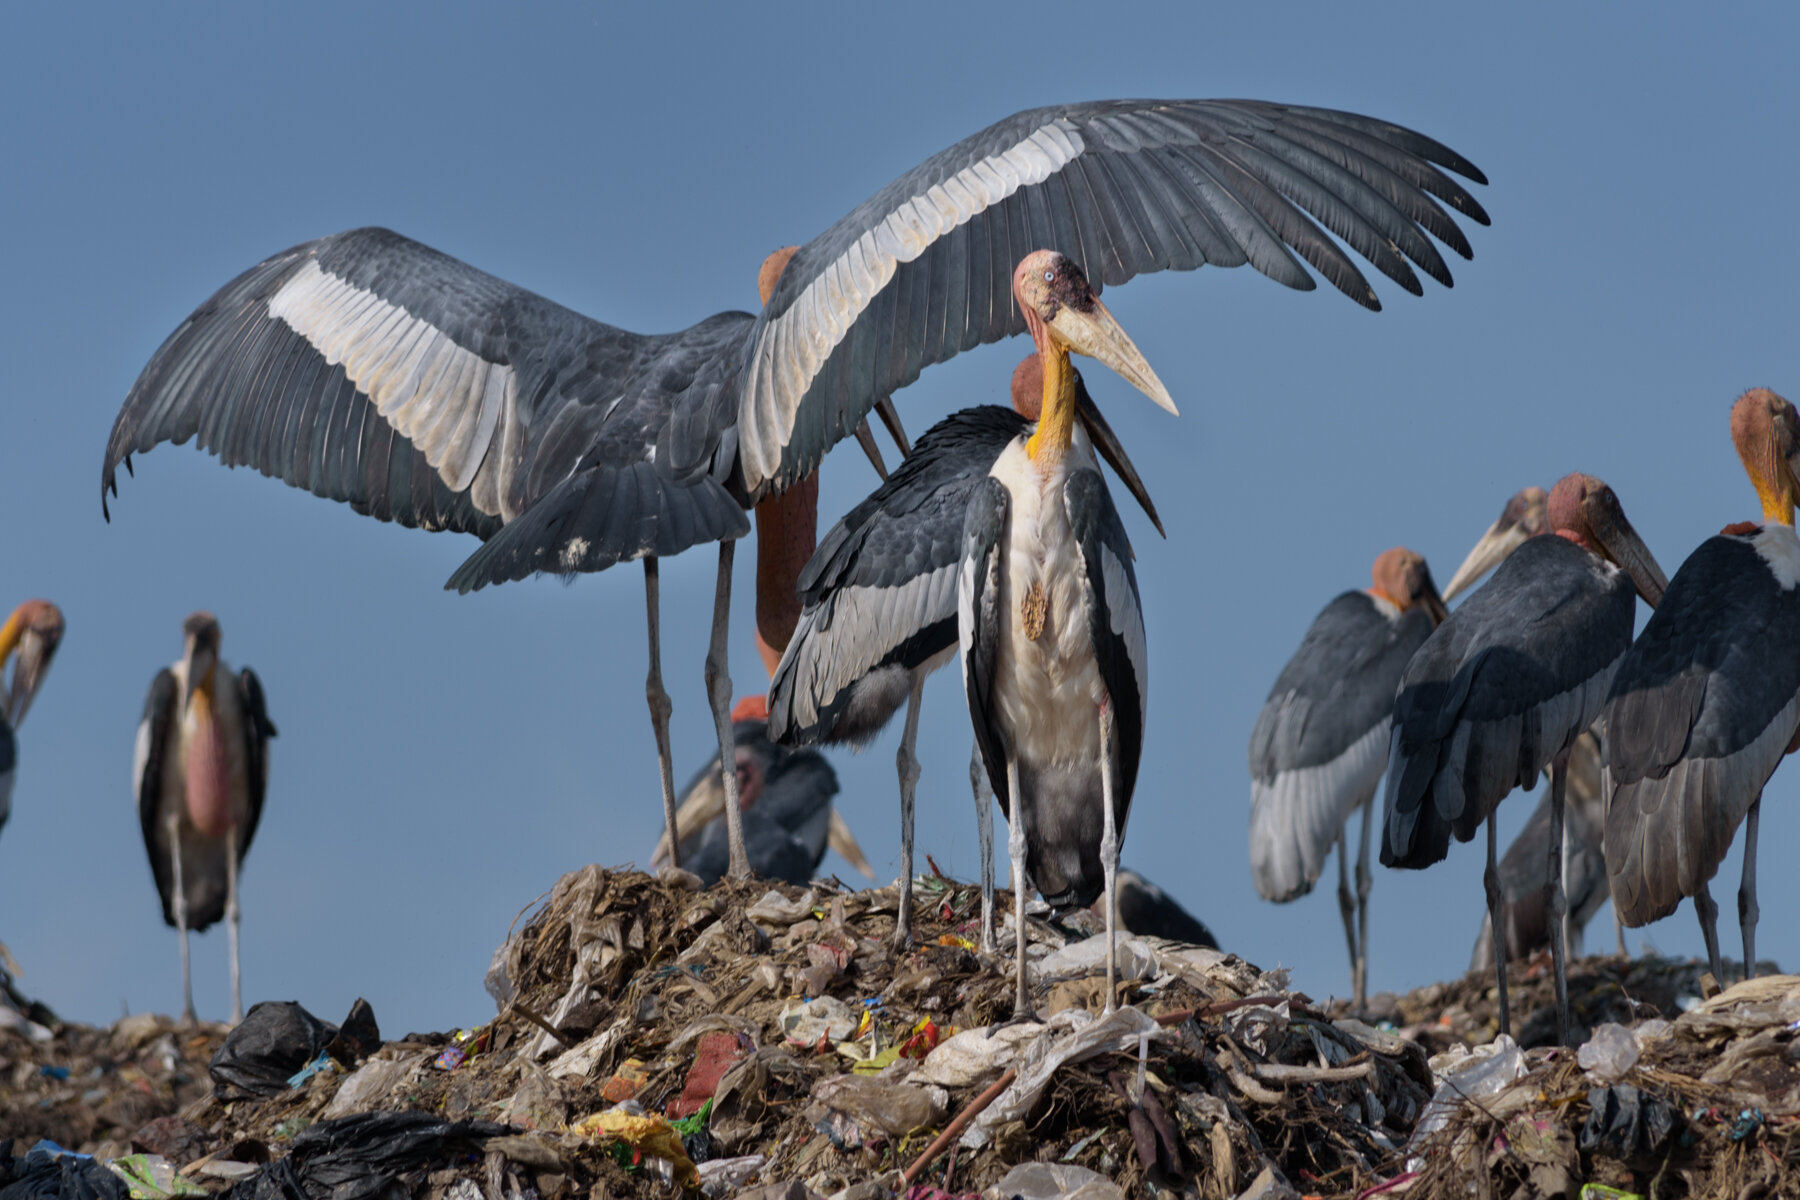  The Boragaon landfill - the largest trash dump in India spreading across 94 acres is home to the Greater Adjutant Stork. The birds are scavengers and therefore dumping sites are an important feeding ground for them. 